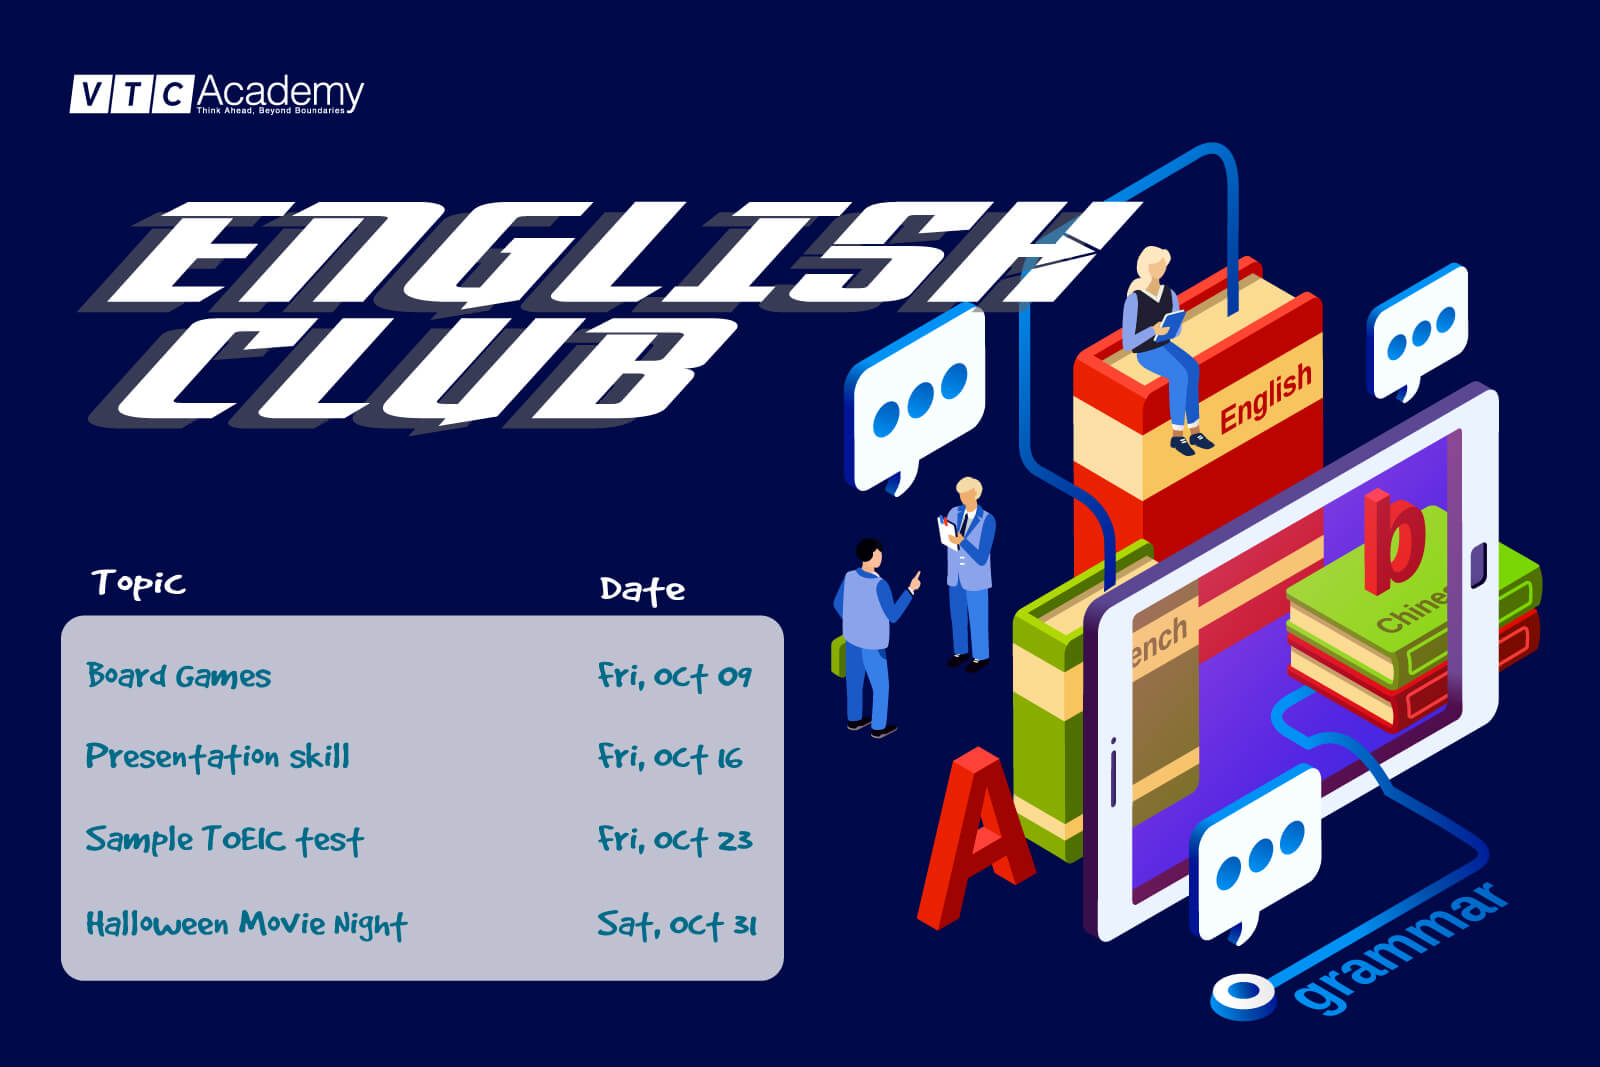 Schedule of student clubs in October 2020 at VTC Academy HCMC